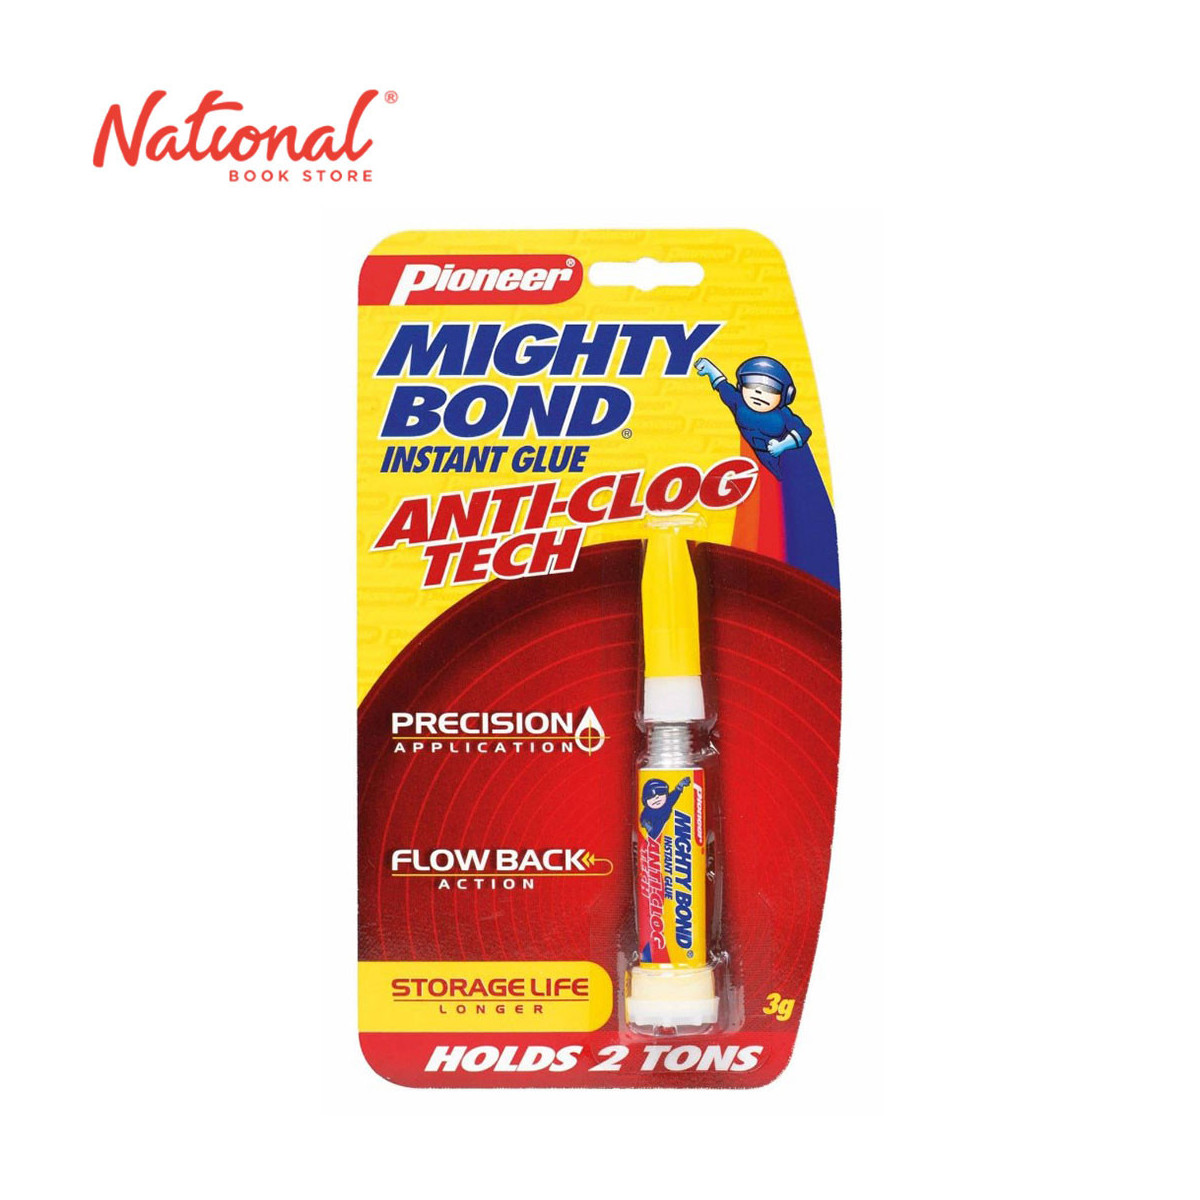 Mighty Bond Tube Instant Glue Anti-Clog Holds 2 Tons 3grams